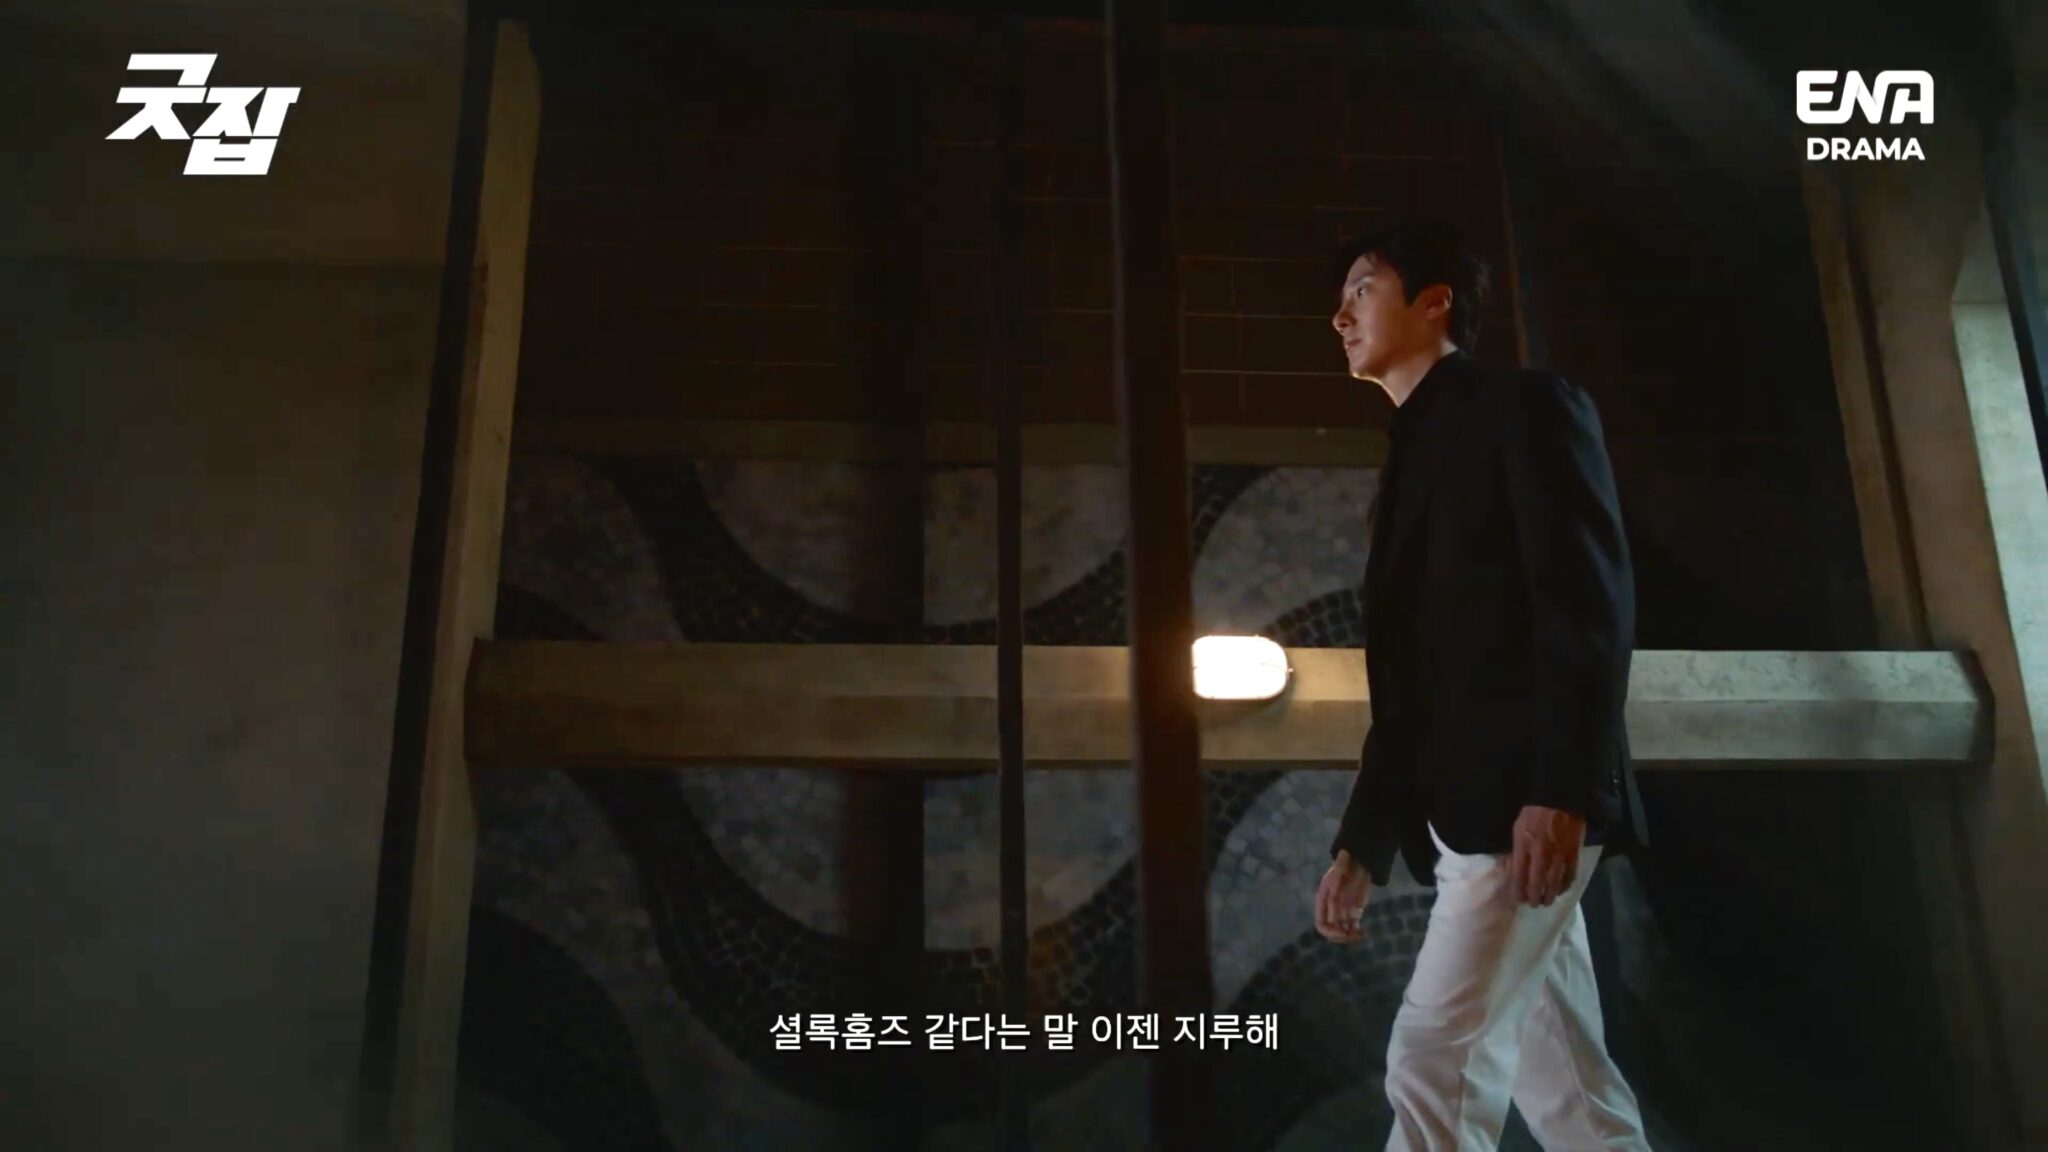 Jung Il-woo and Kwon Yuri do a Good Job of sleuthing